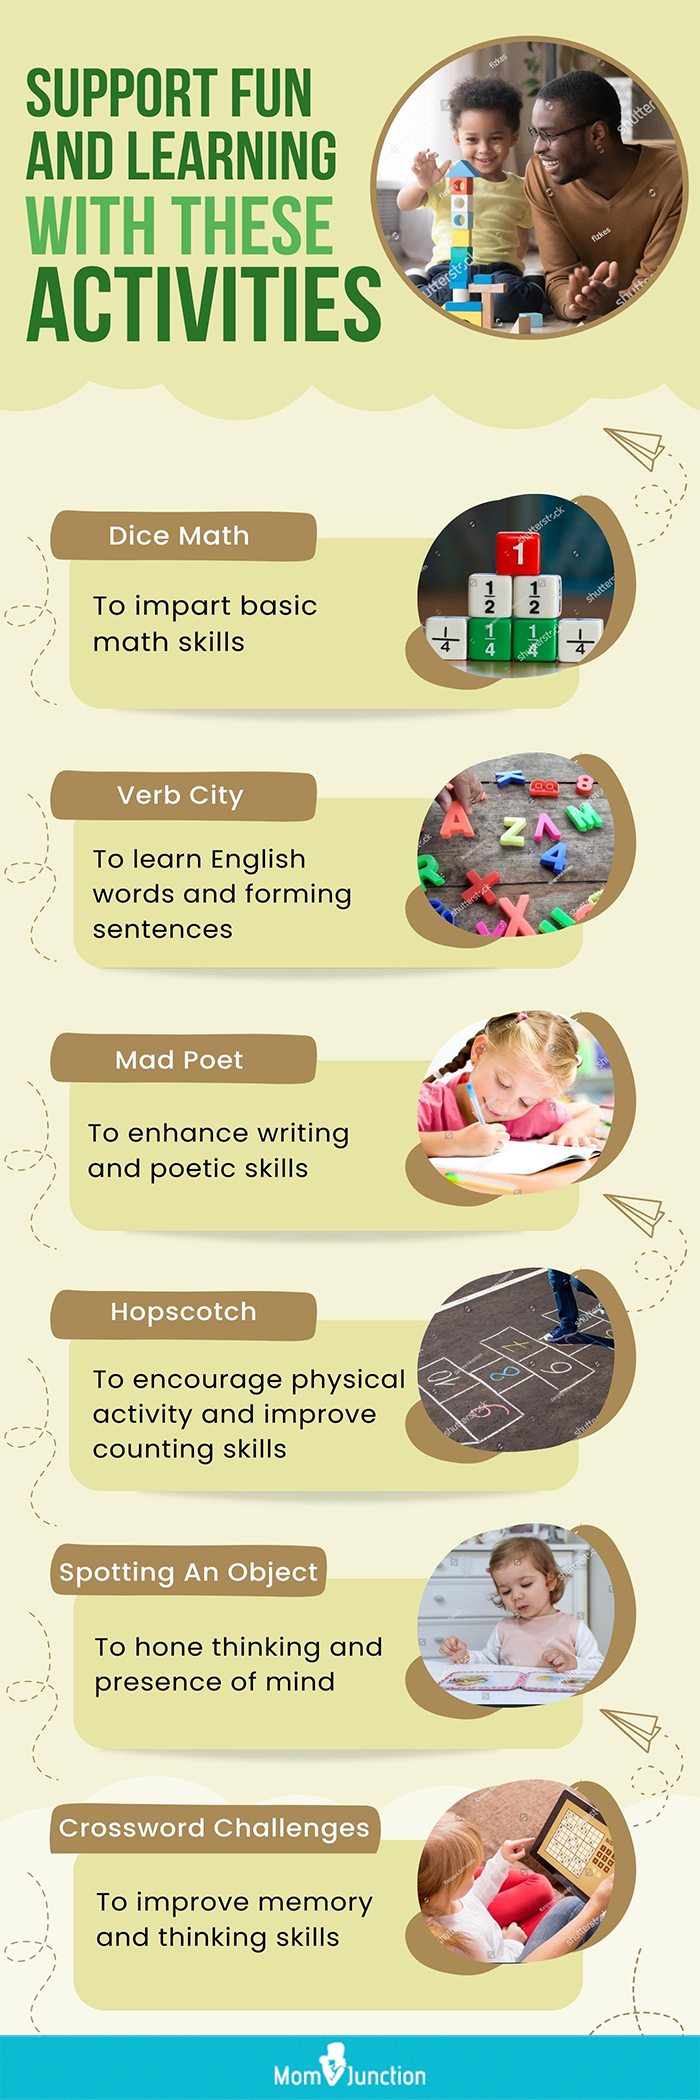 support fun and learning with these activities (infographic)